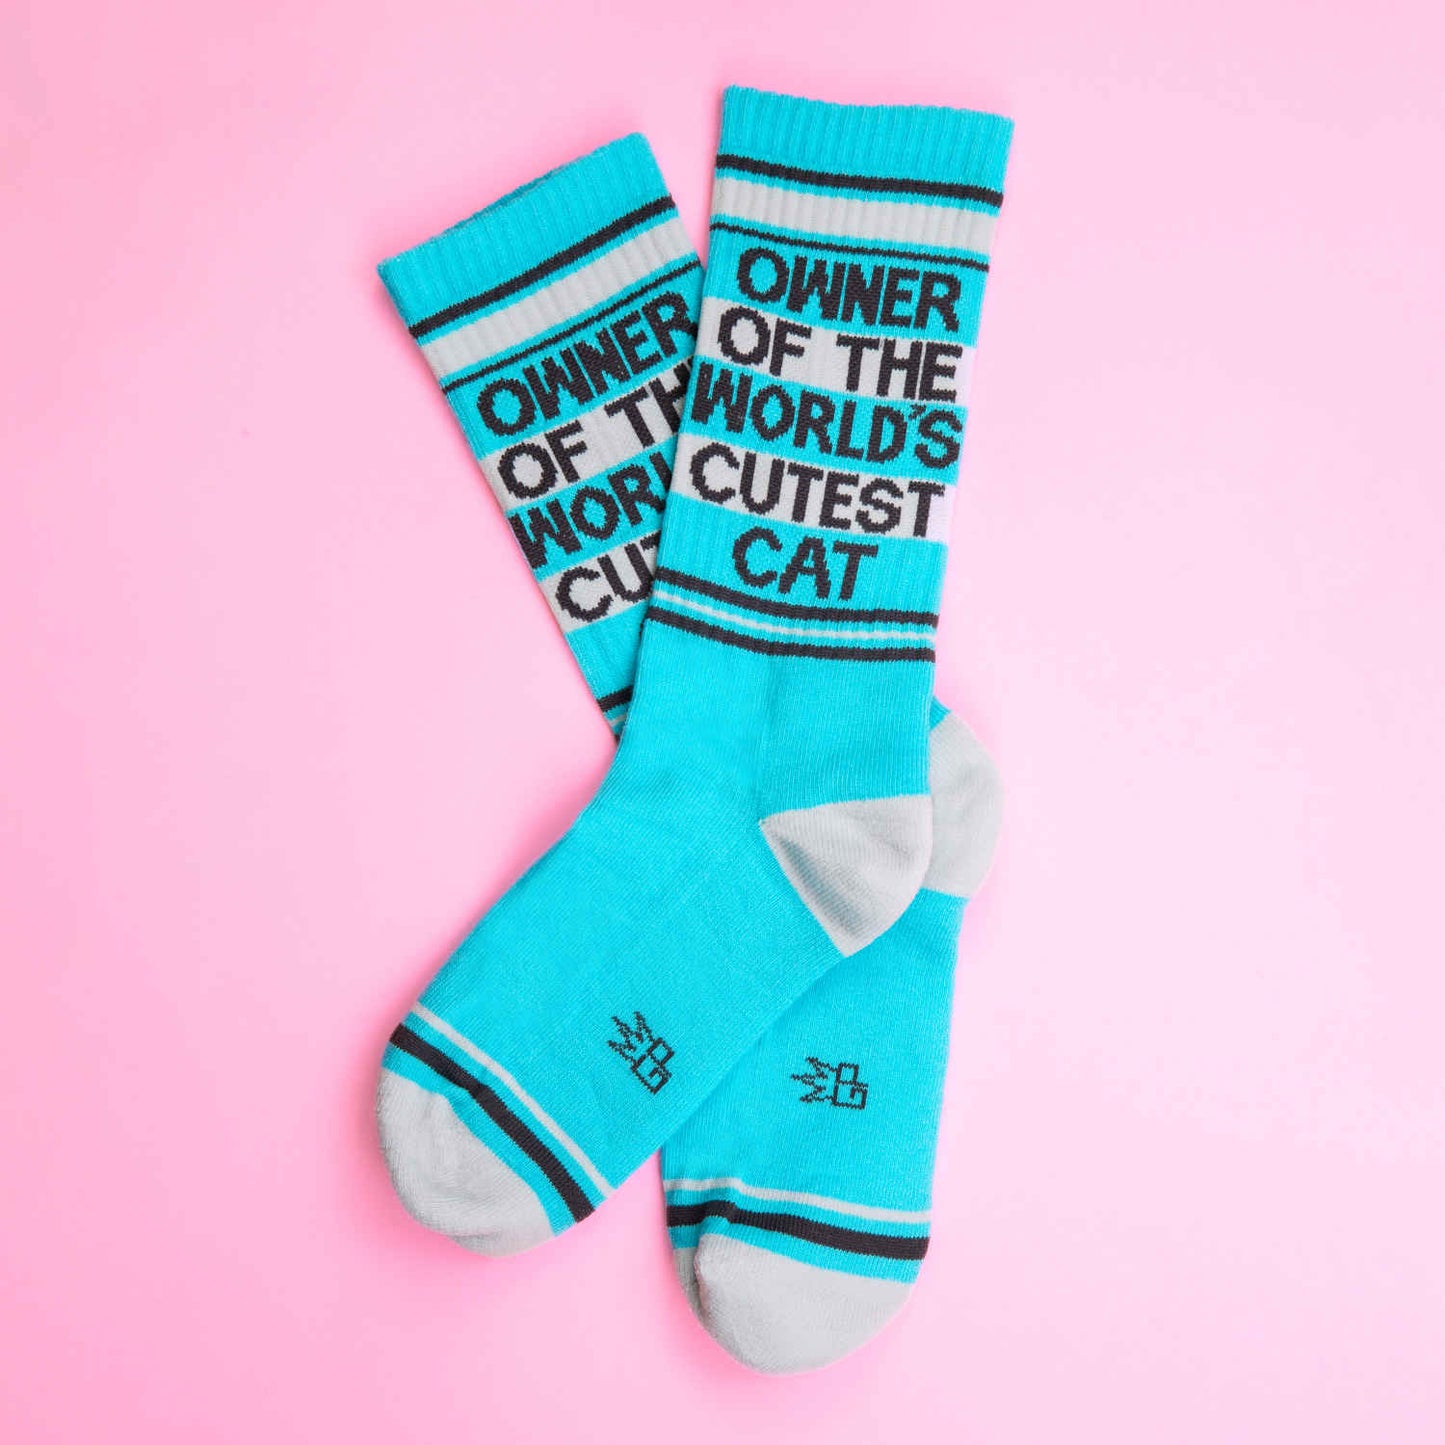 Owner of the World’s Cutest Cat Gym Socks (One Size Fits Most)